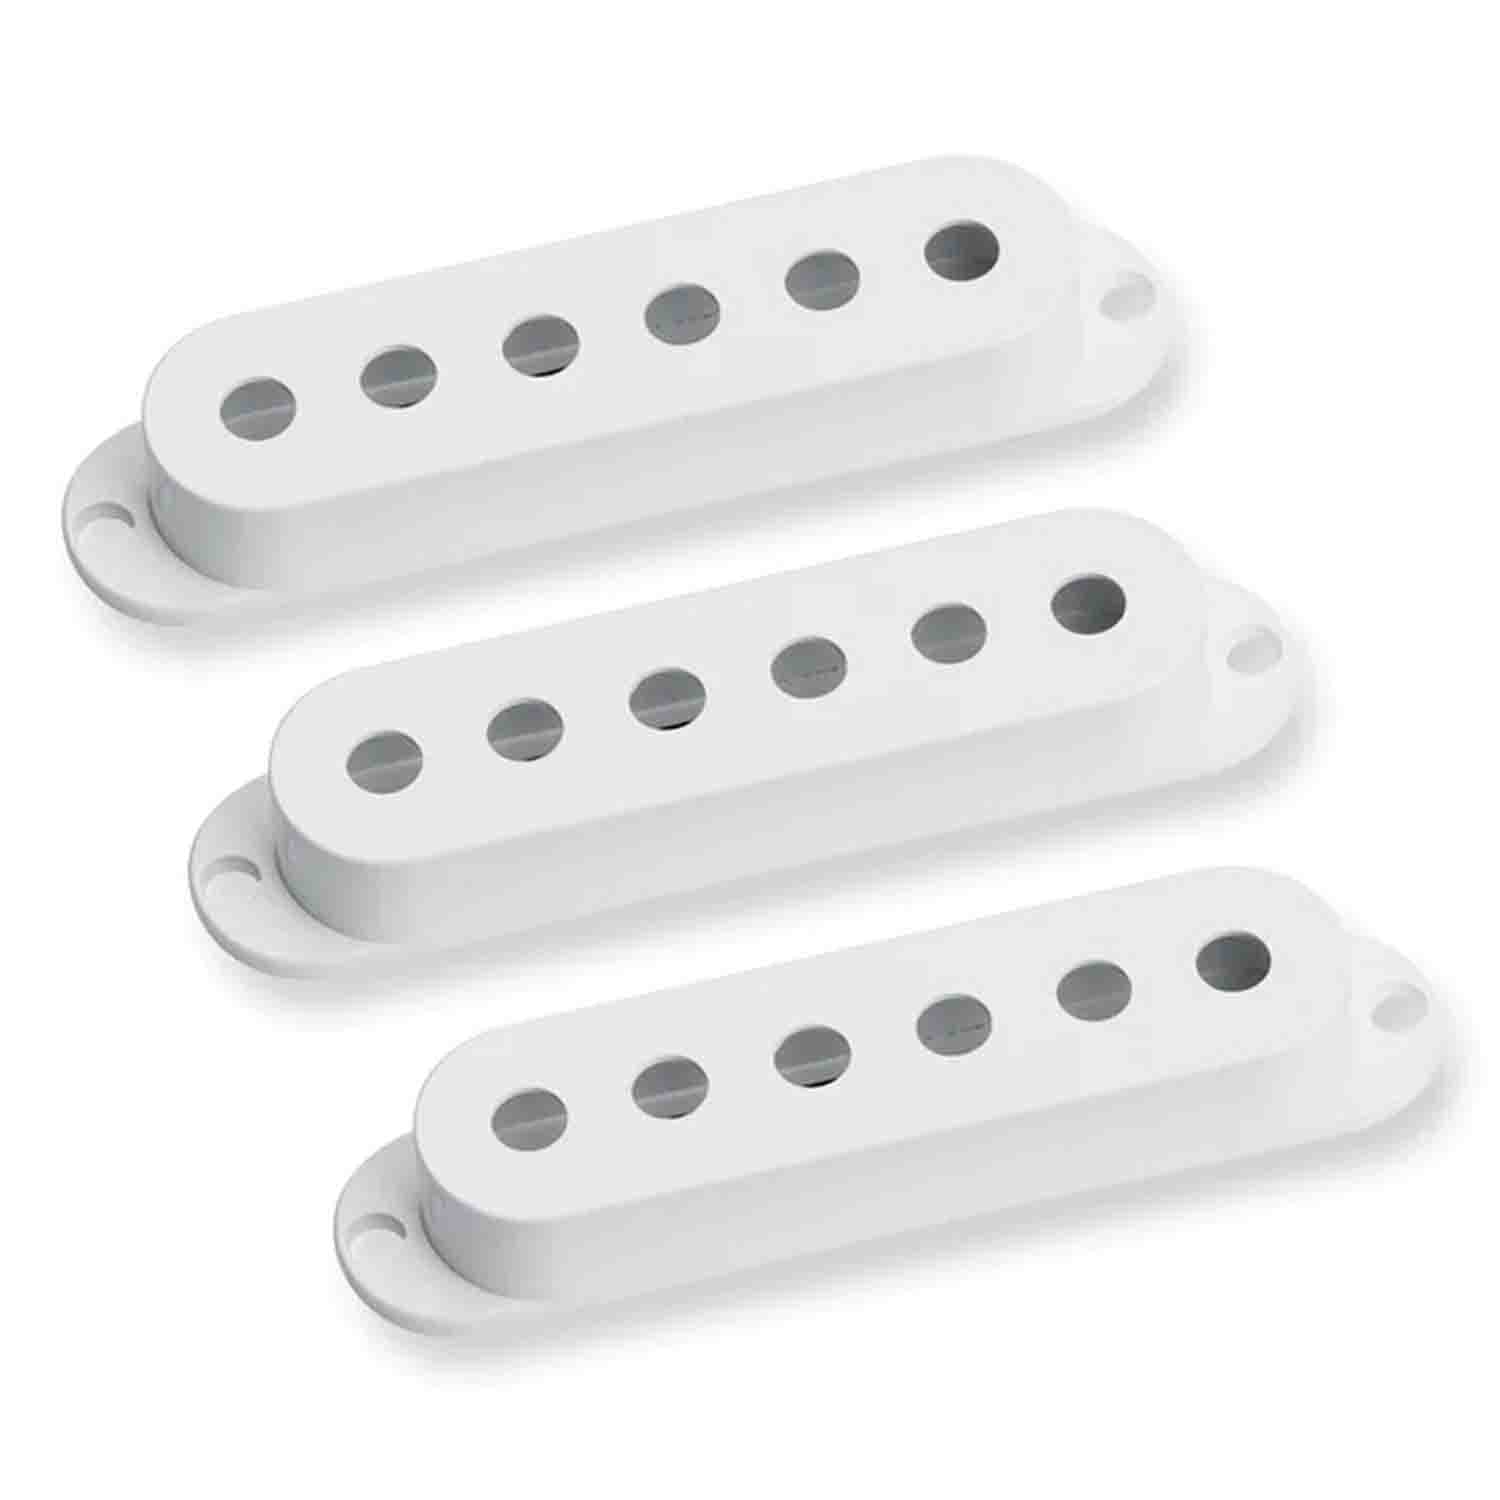 Seymour Duncan Strat Replacement Pickup Covers in White (Set of 3) - Hollywood DJ